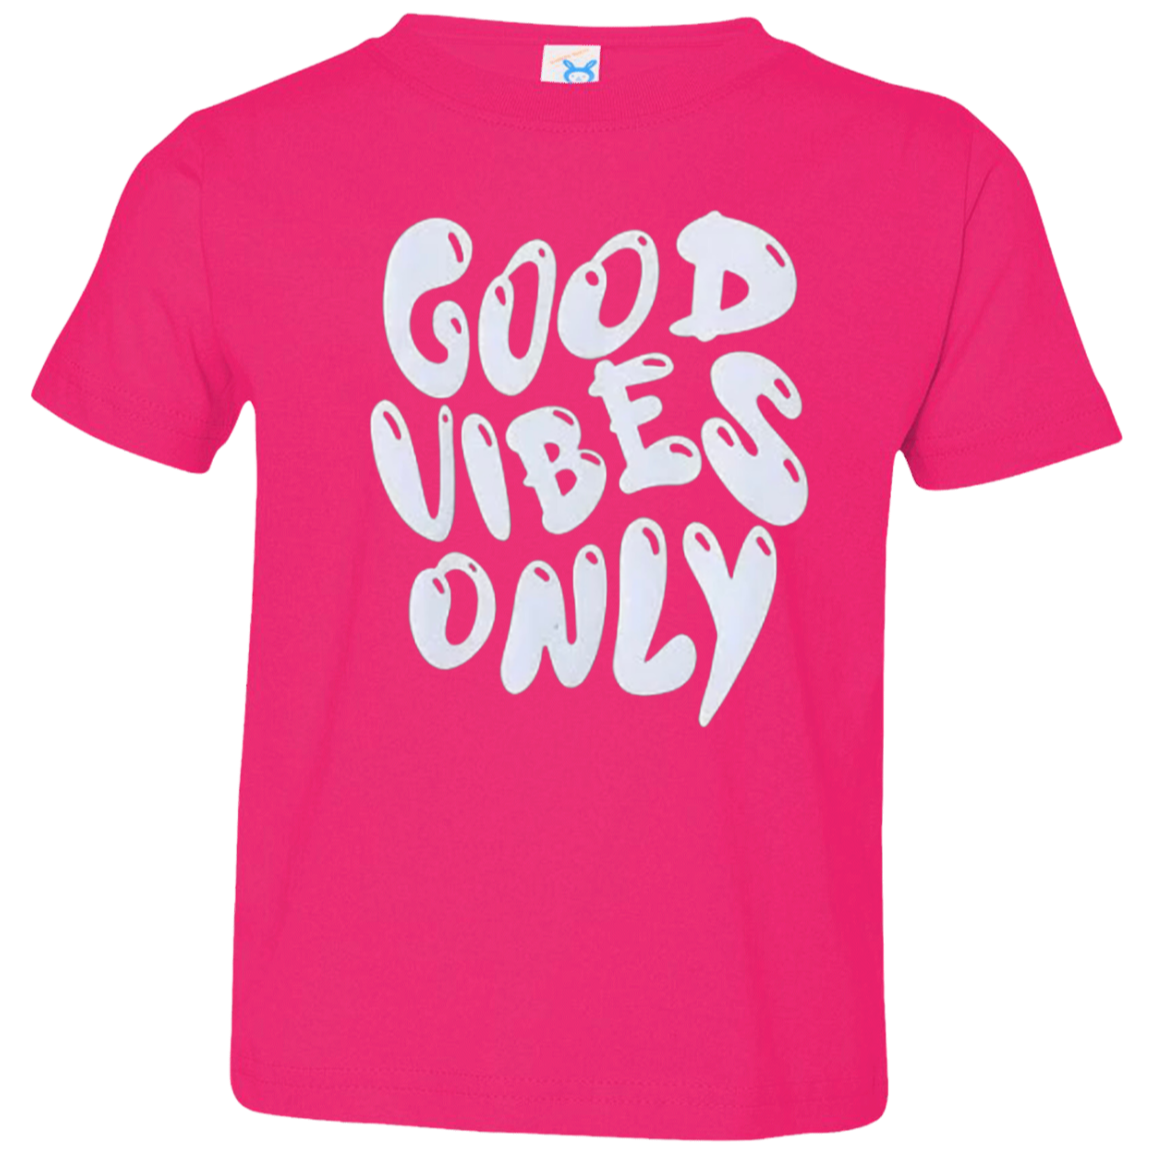 Good Vibes Only! Tee